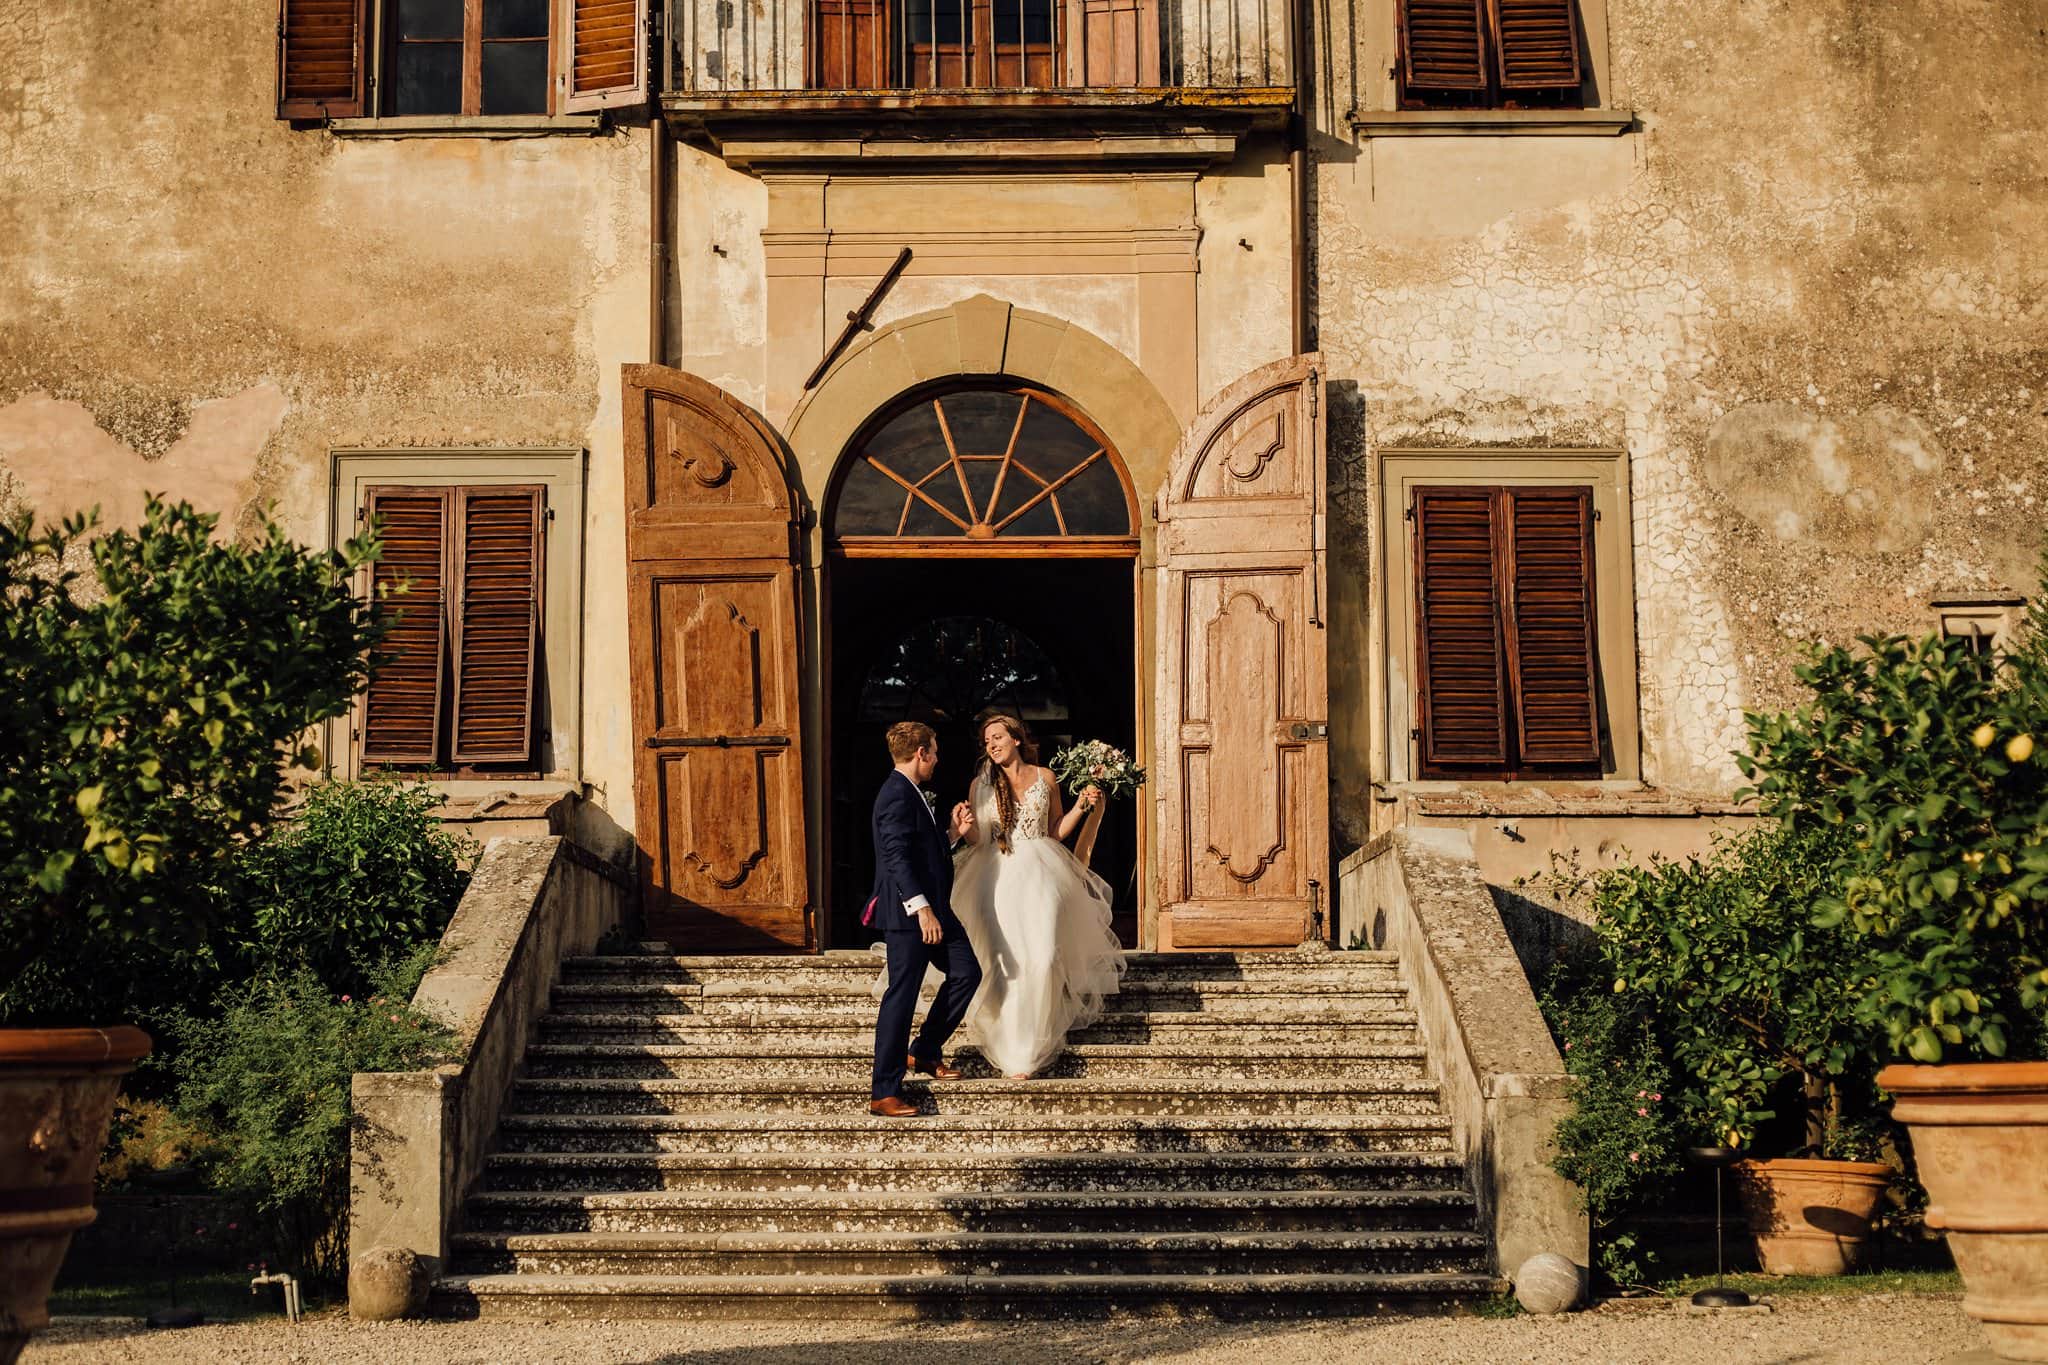 destination wedding planned by Wiskow and White in Italy